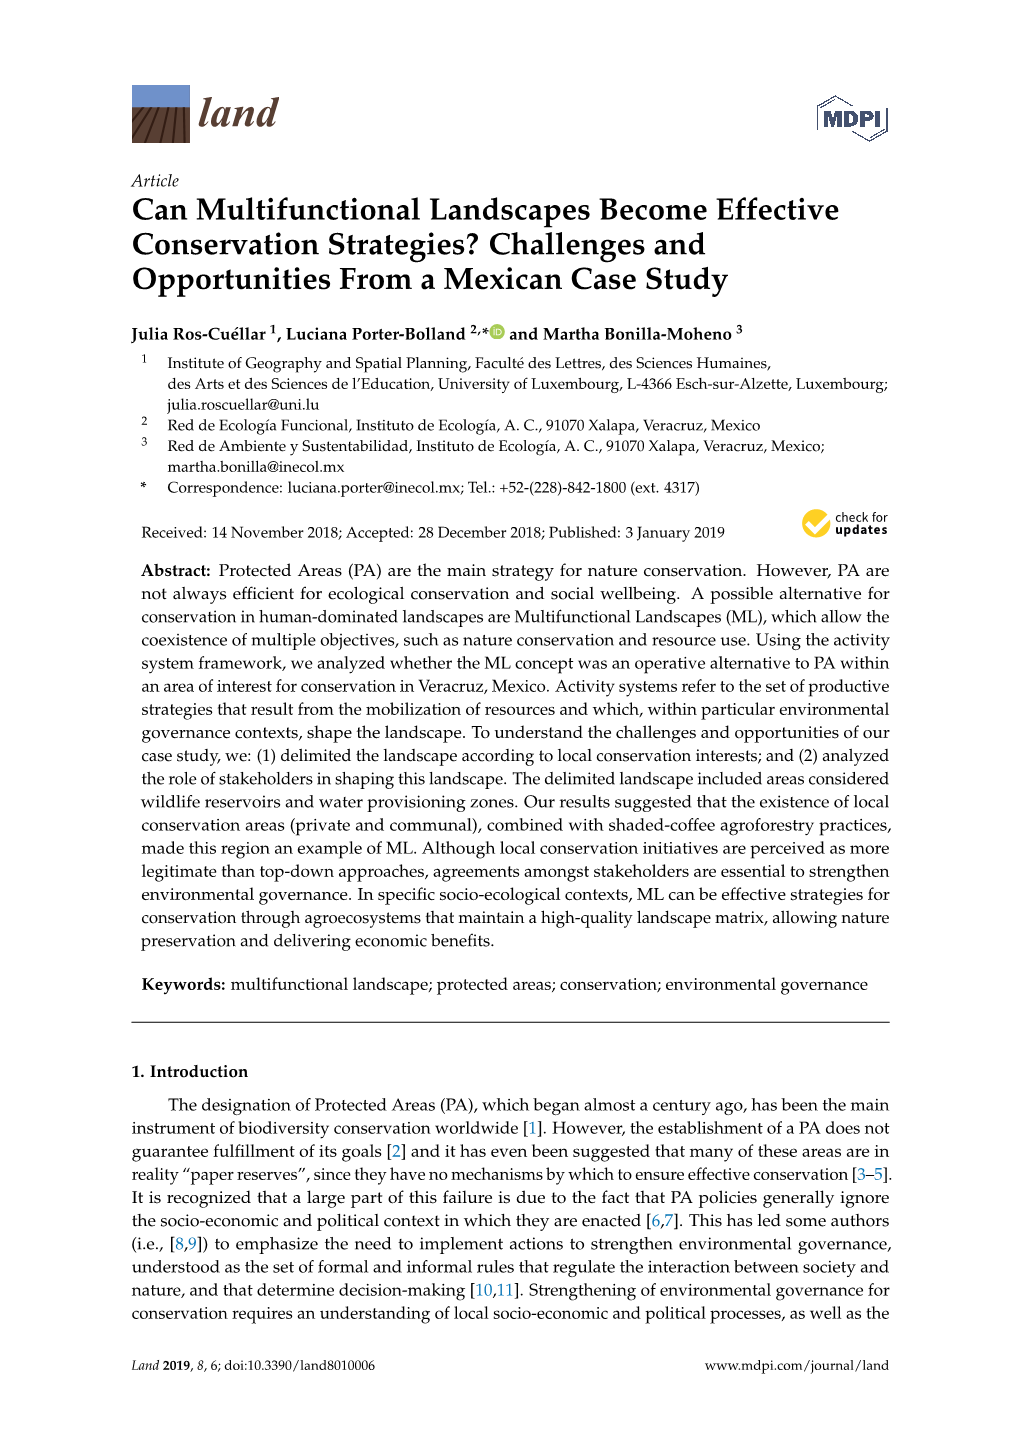 Can Multifunctional Landscapes Become Effective Conservation Strategies? Challenges and Opportunities from a Mexican Case Study